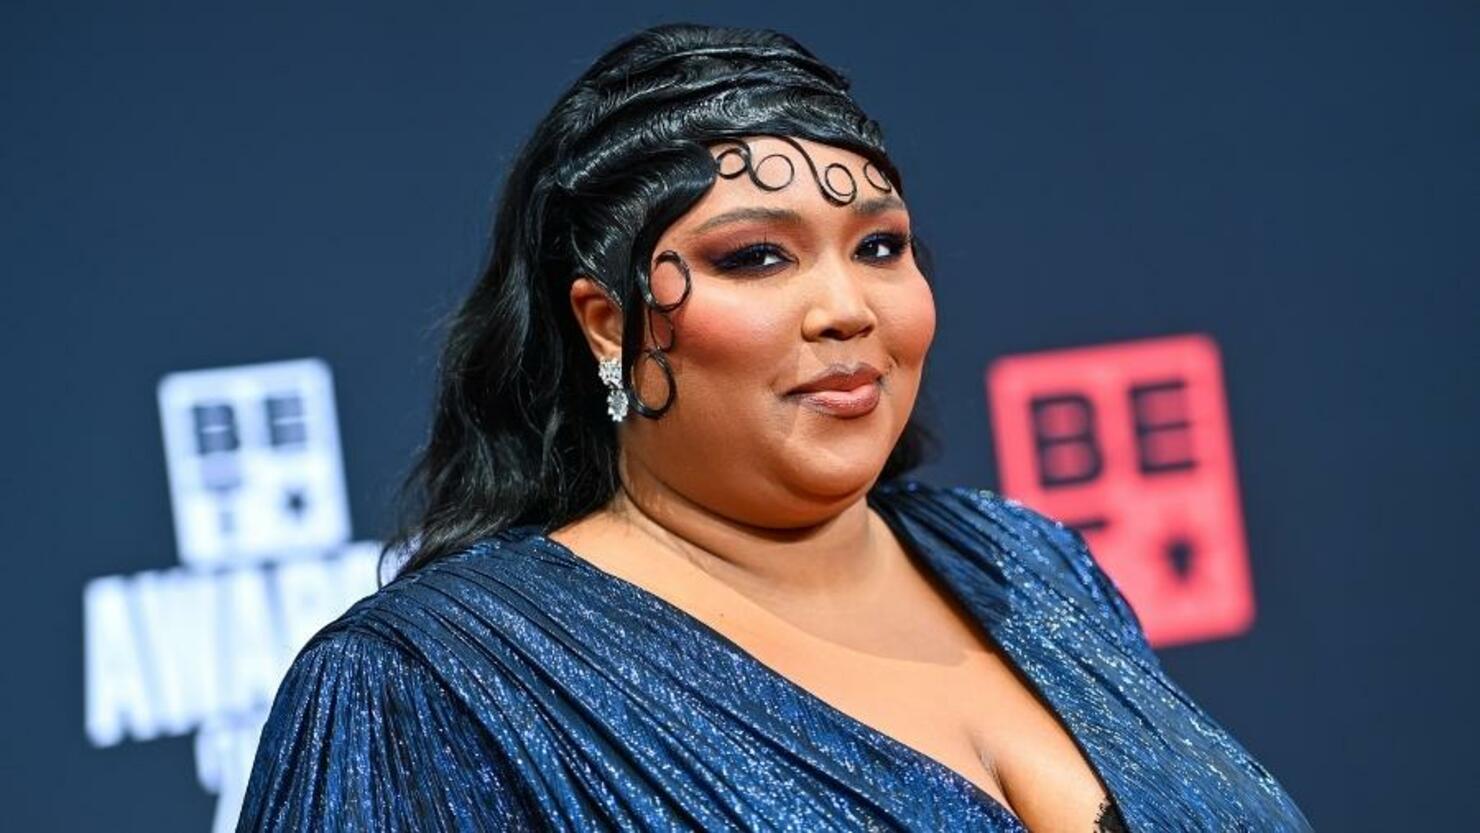 Lizzo Channels Her Inner Emo Kid While Getting Ready For 2022 BET